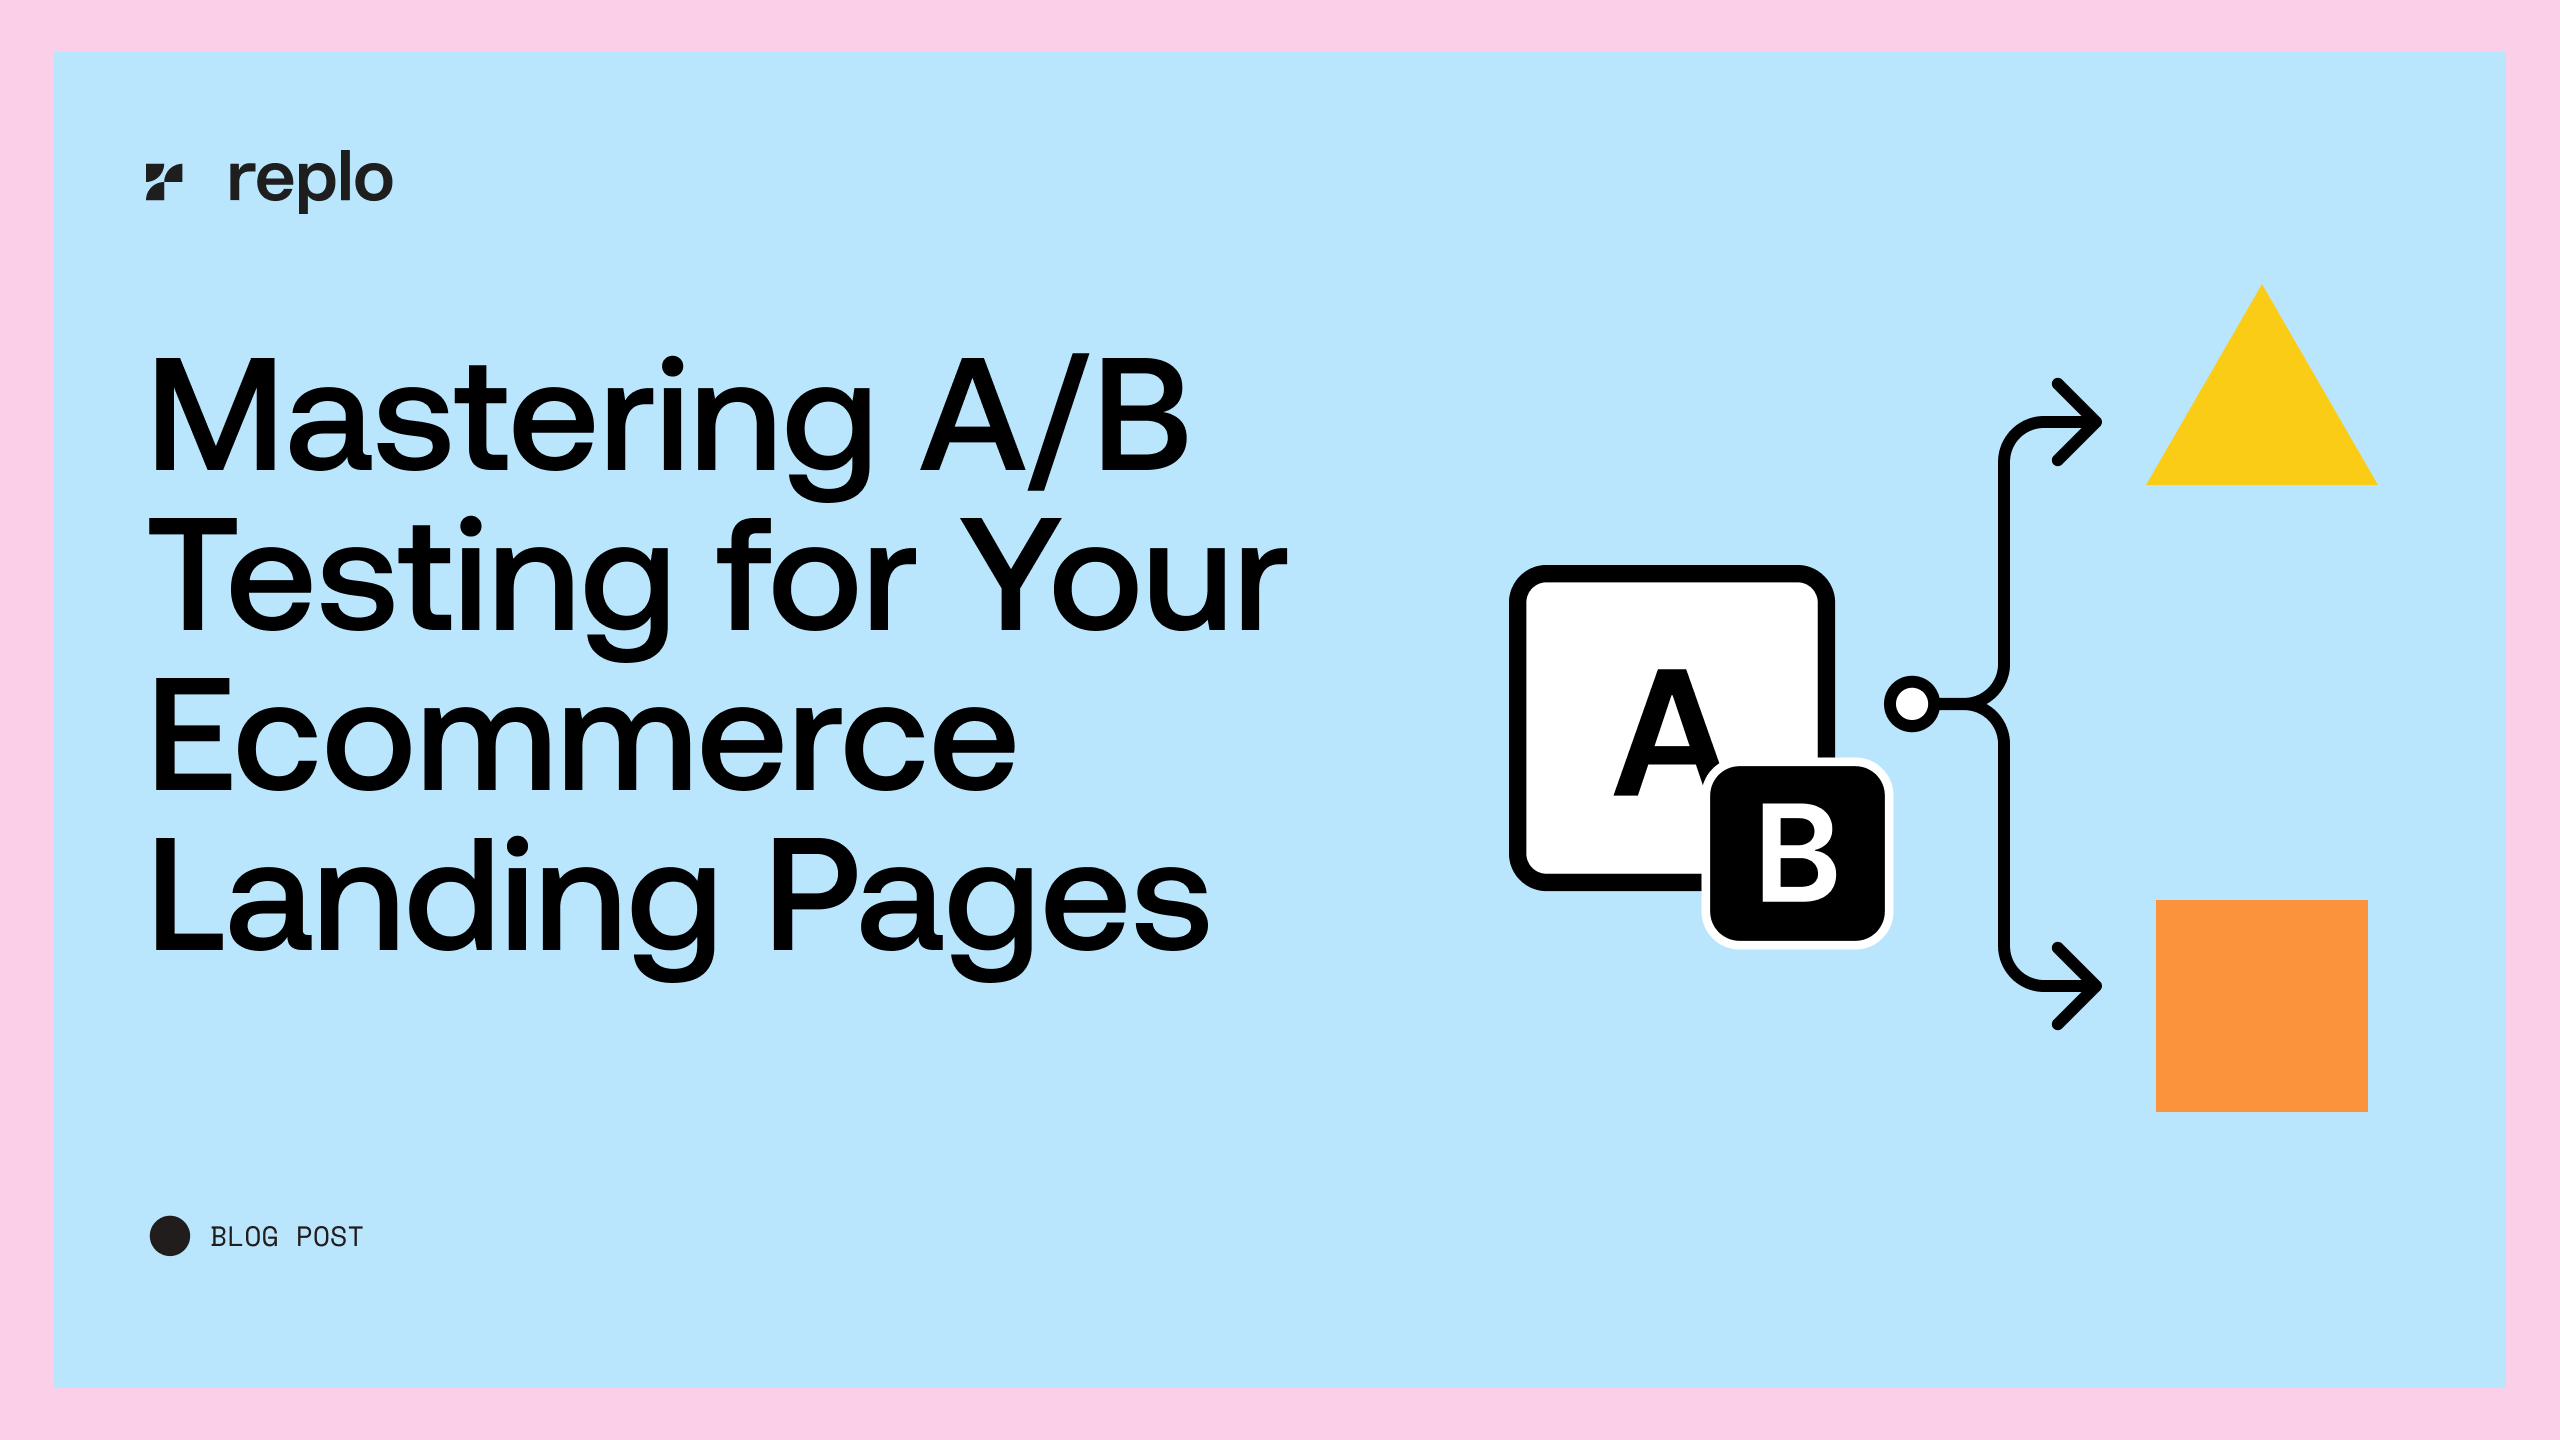 Mastering A/B Testing for Your Ecommerce Landing Pages